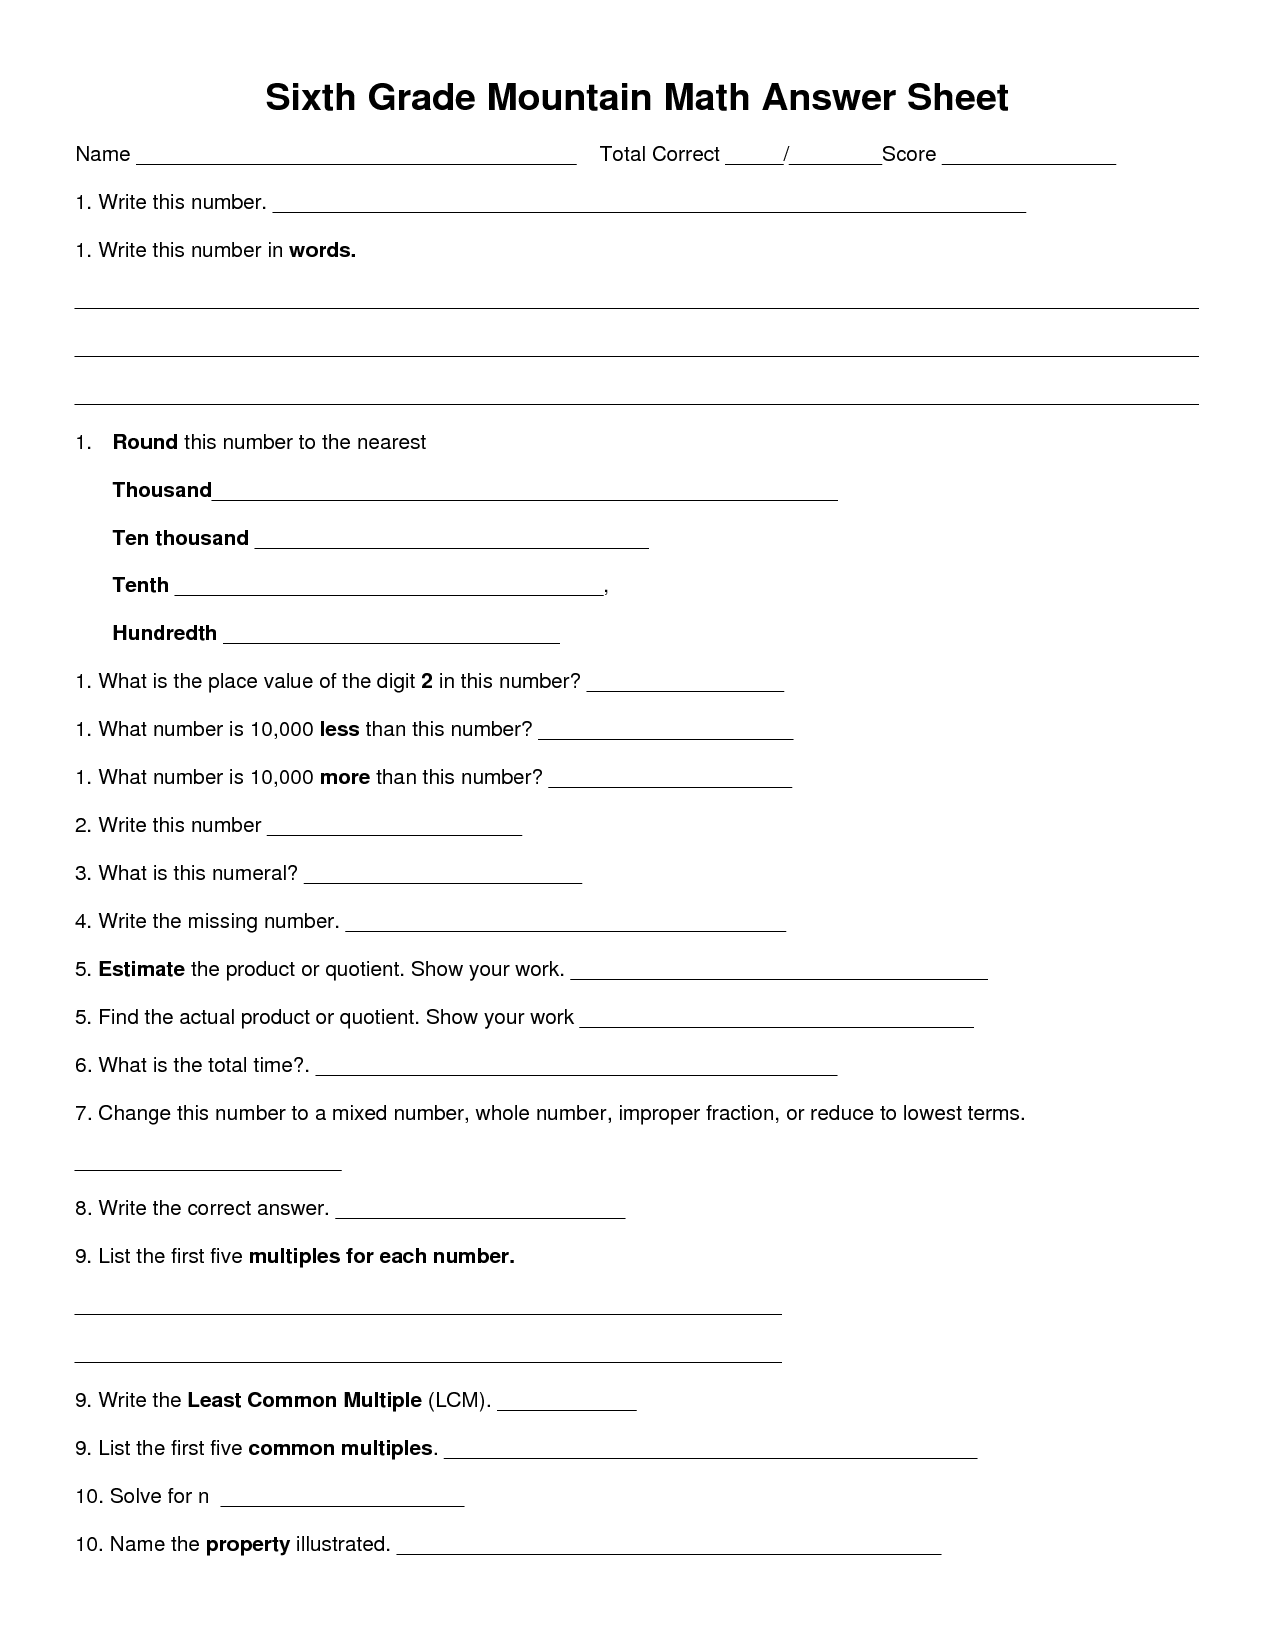 10 Best Images of Place Value Worksheets 6th Grade - Absolute Value